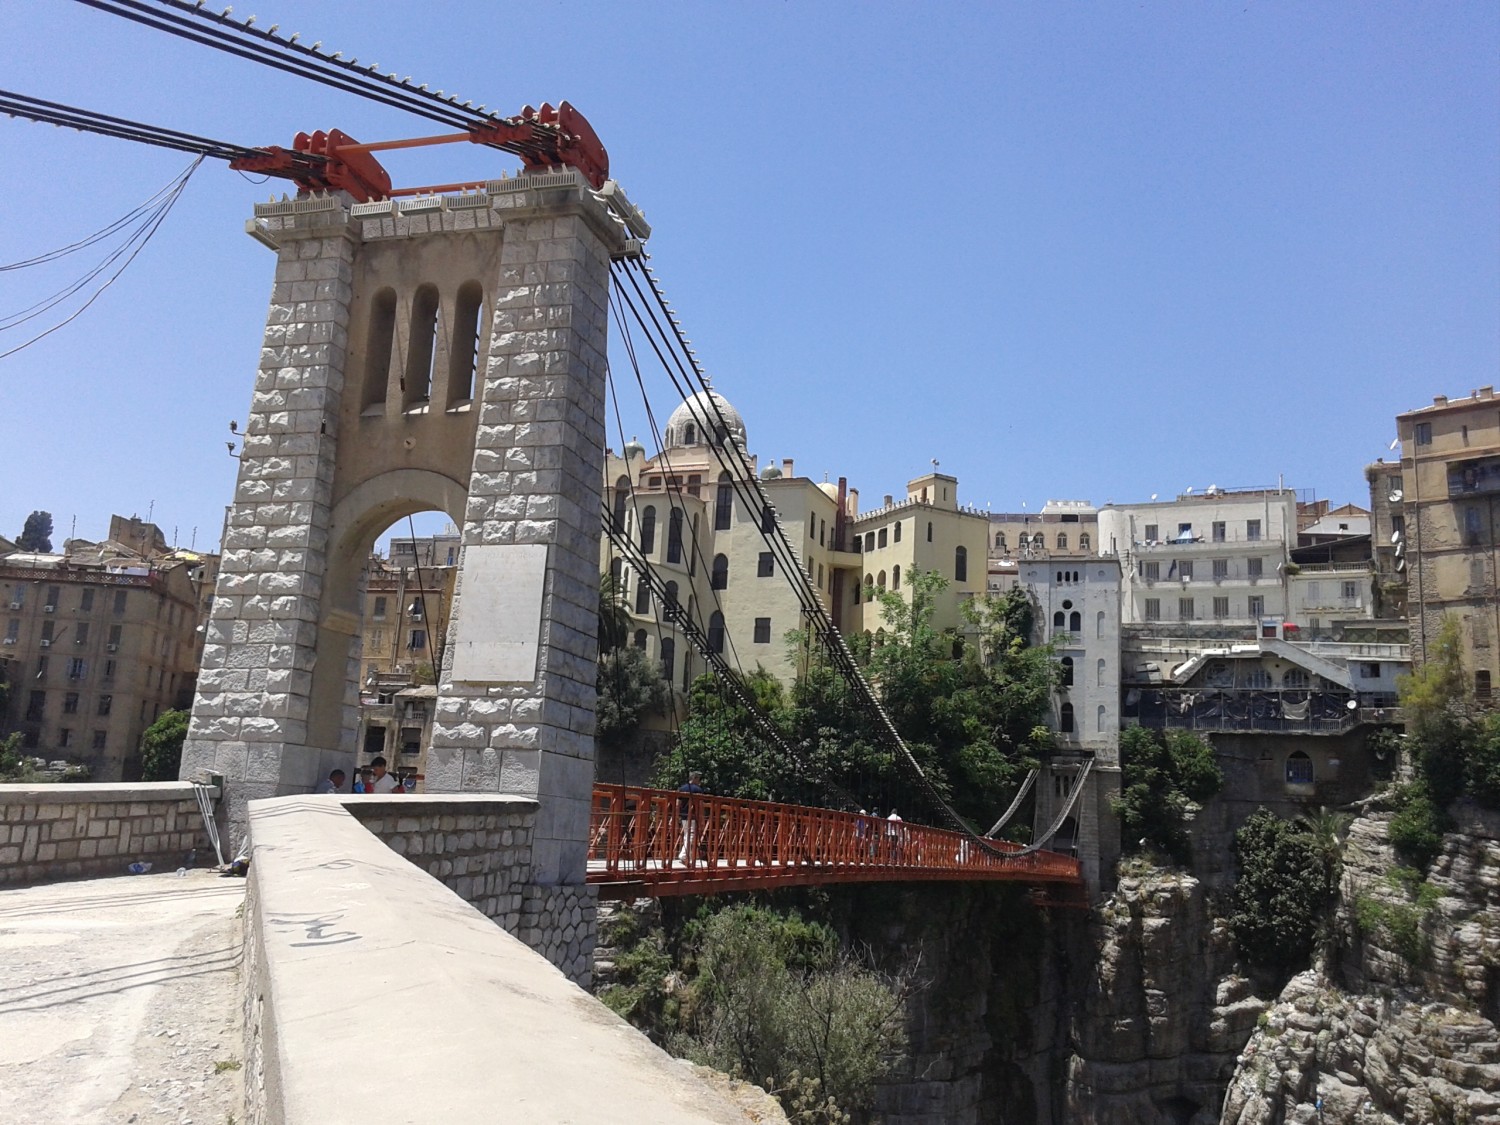 View of the footbridge Mellah Slimane, with the madrasa of Constantine visible in the background